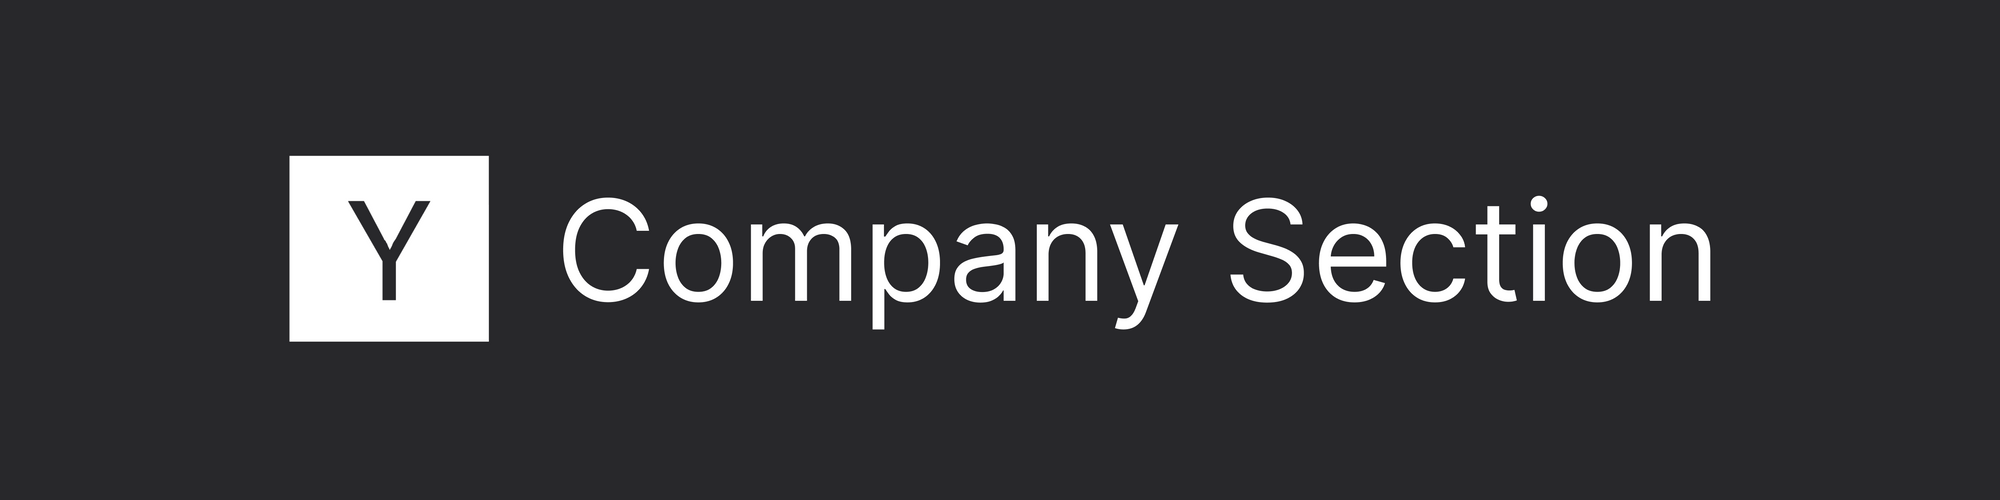 White on black banner graphic that states the section heading: Company Section. This references the corresponding section of the Y Combinator application.